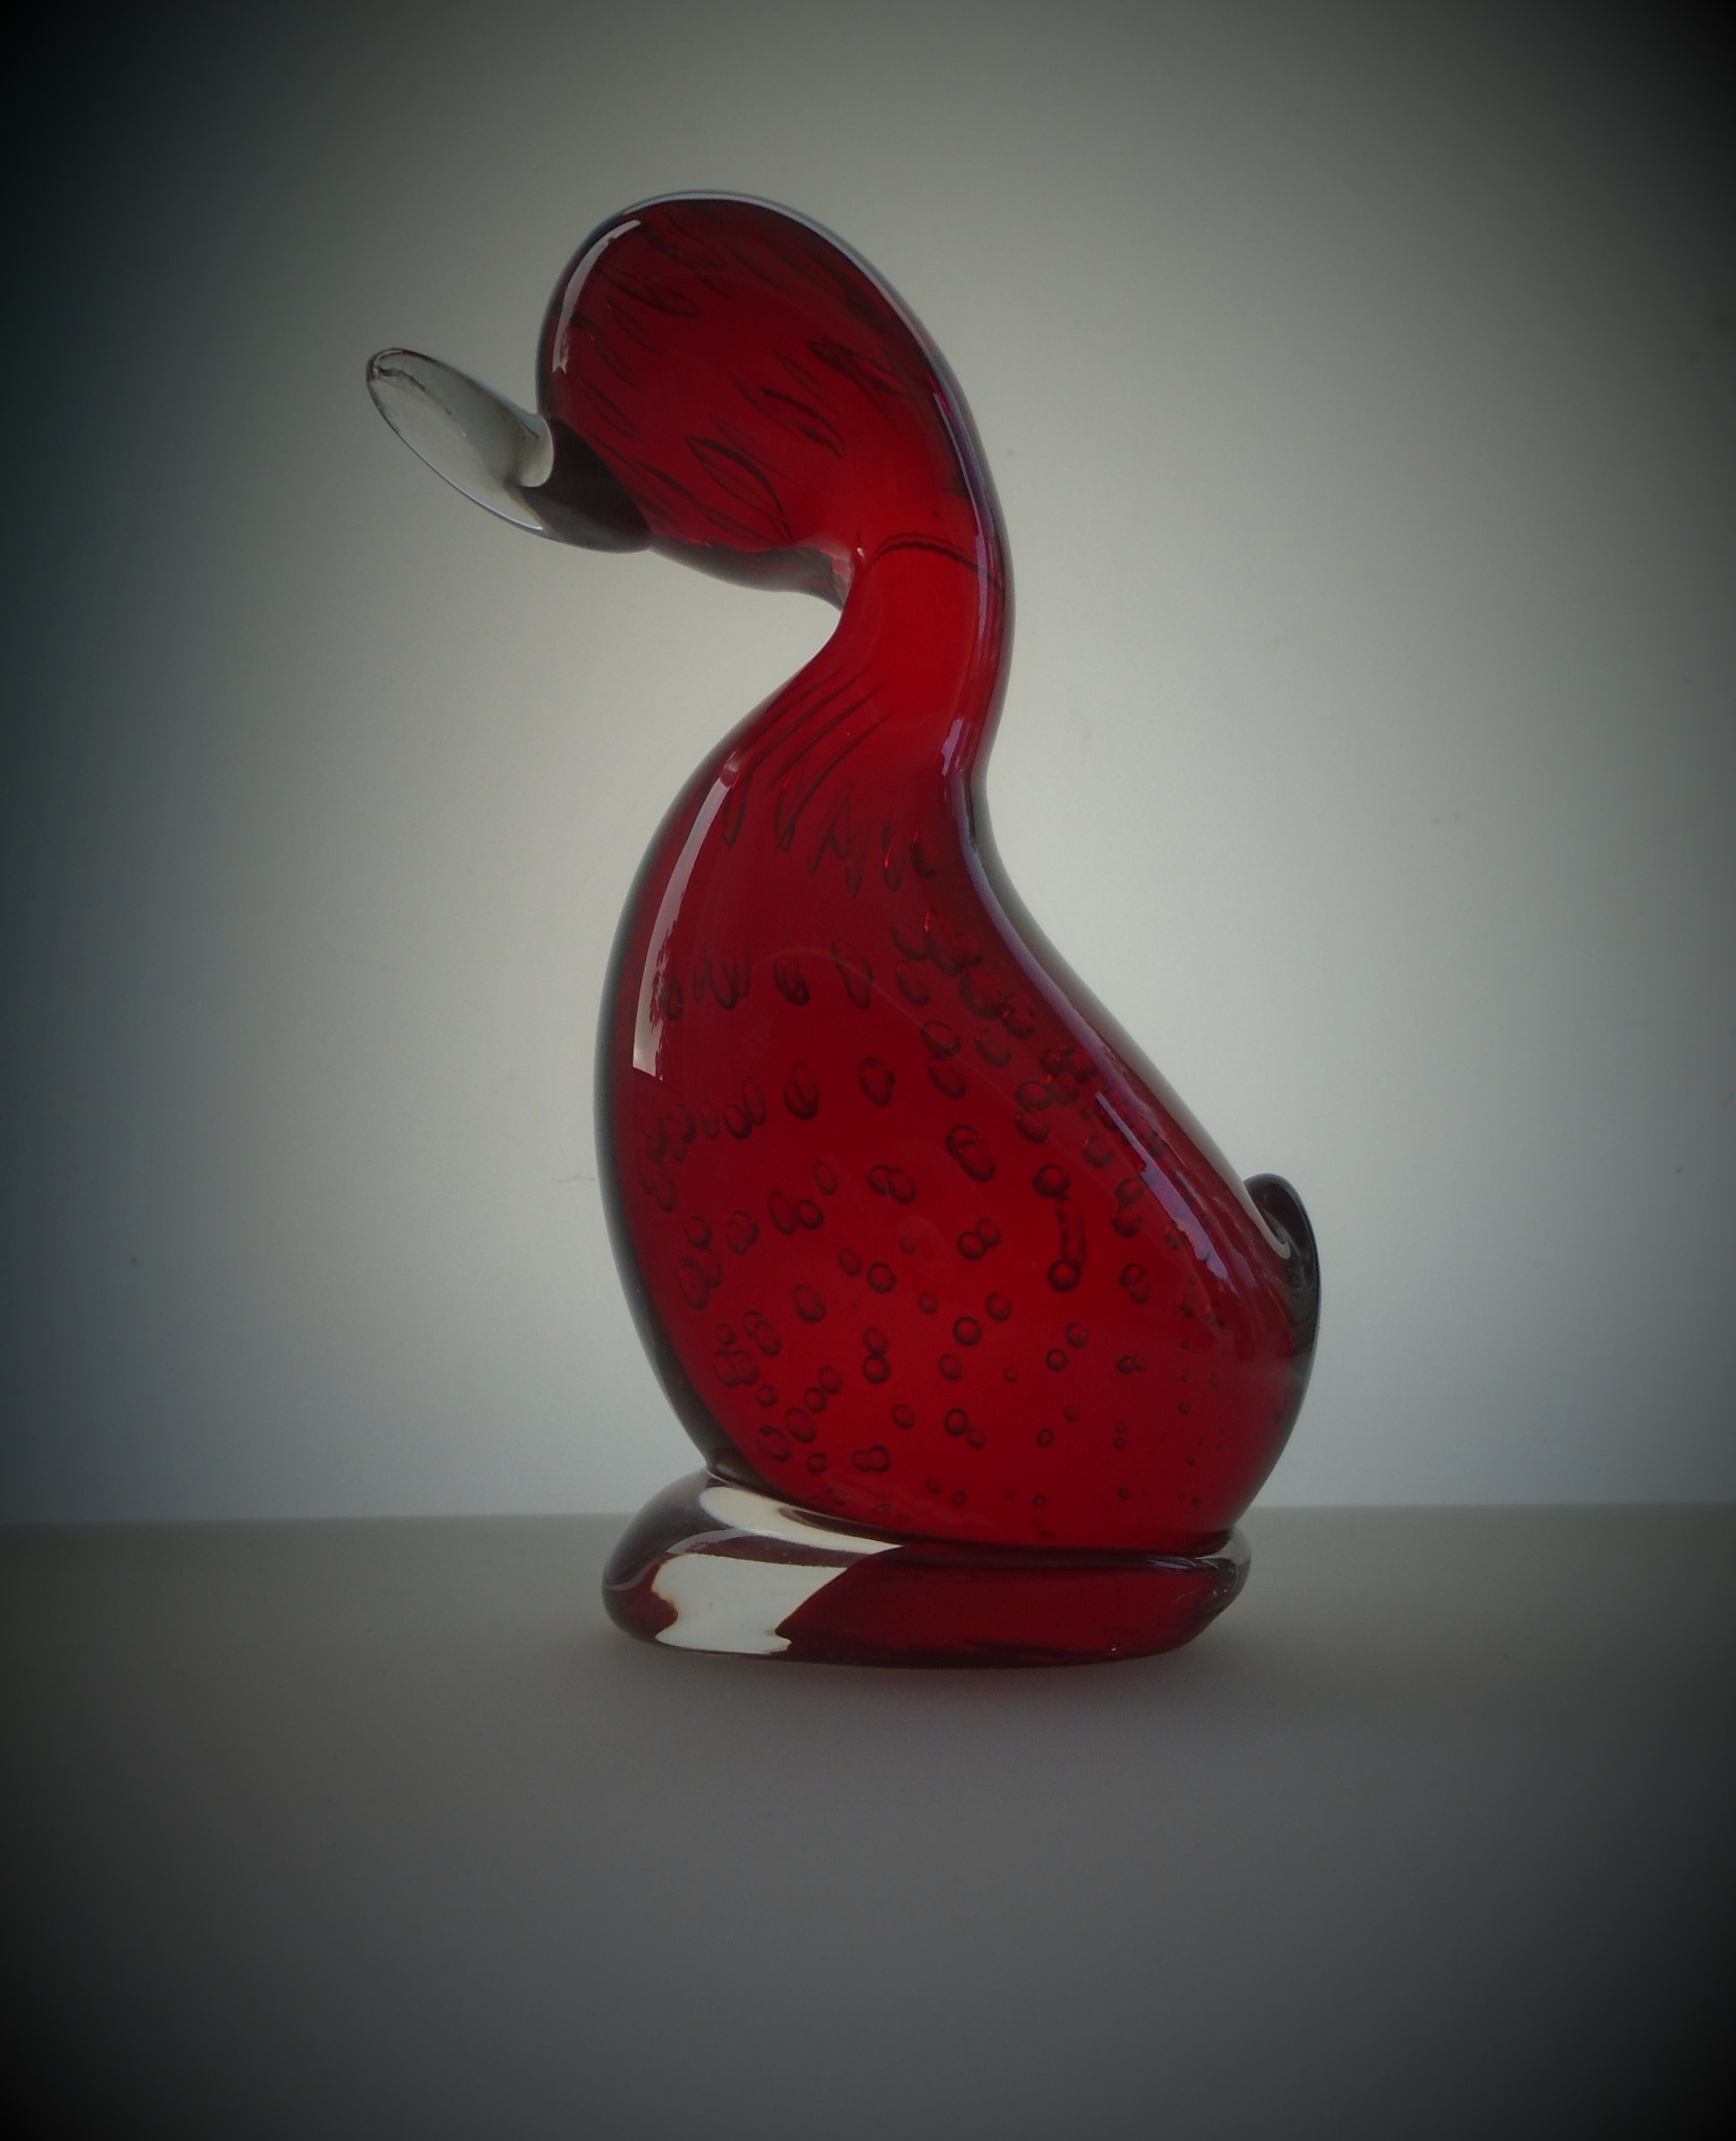 Offered for sale is a 14.5cms high WHITEFRIARS MID CENTURY RUBY GLASS DUCK with controlled bubble decoration